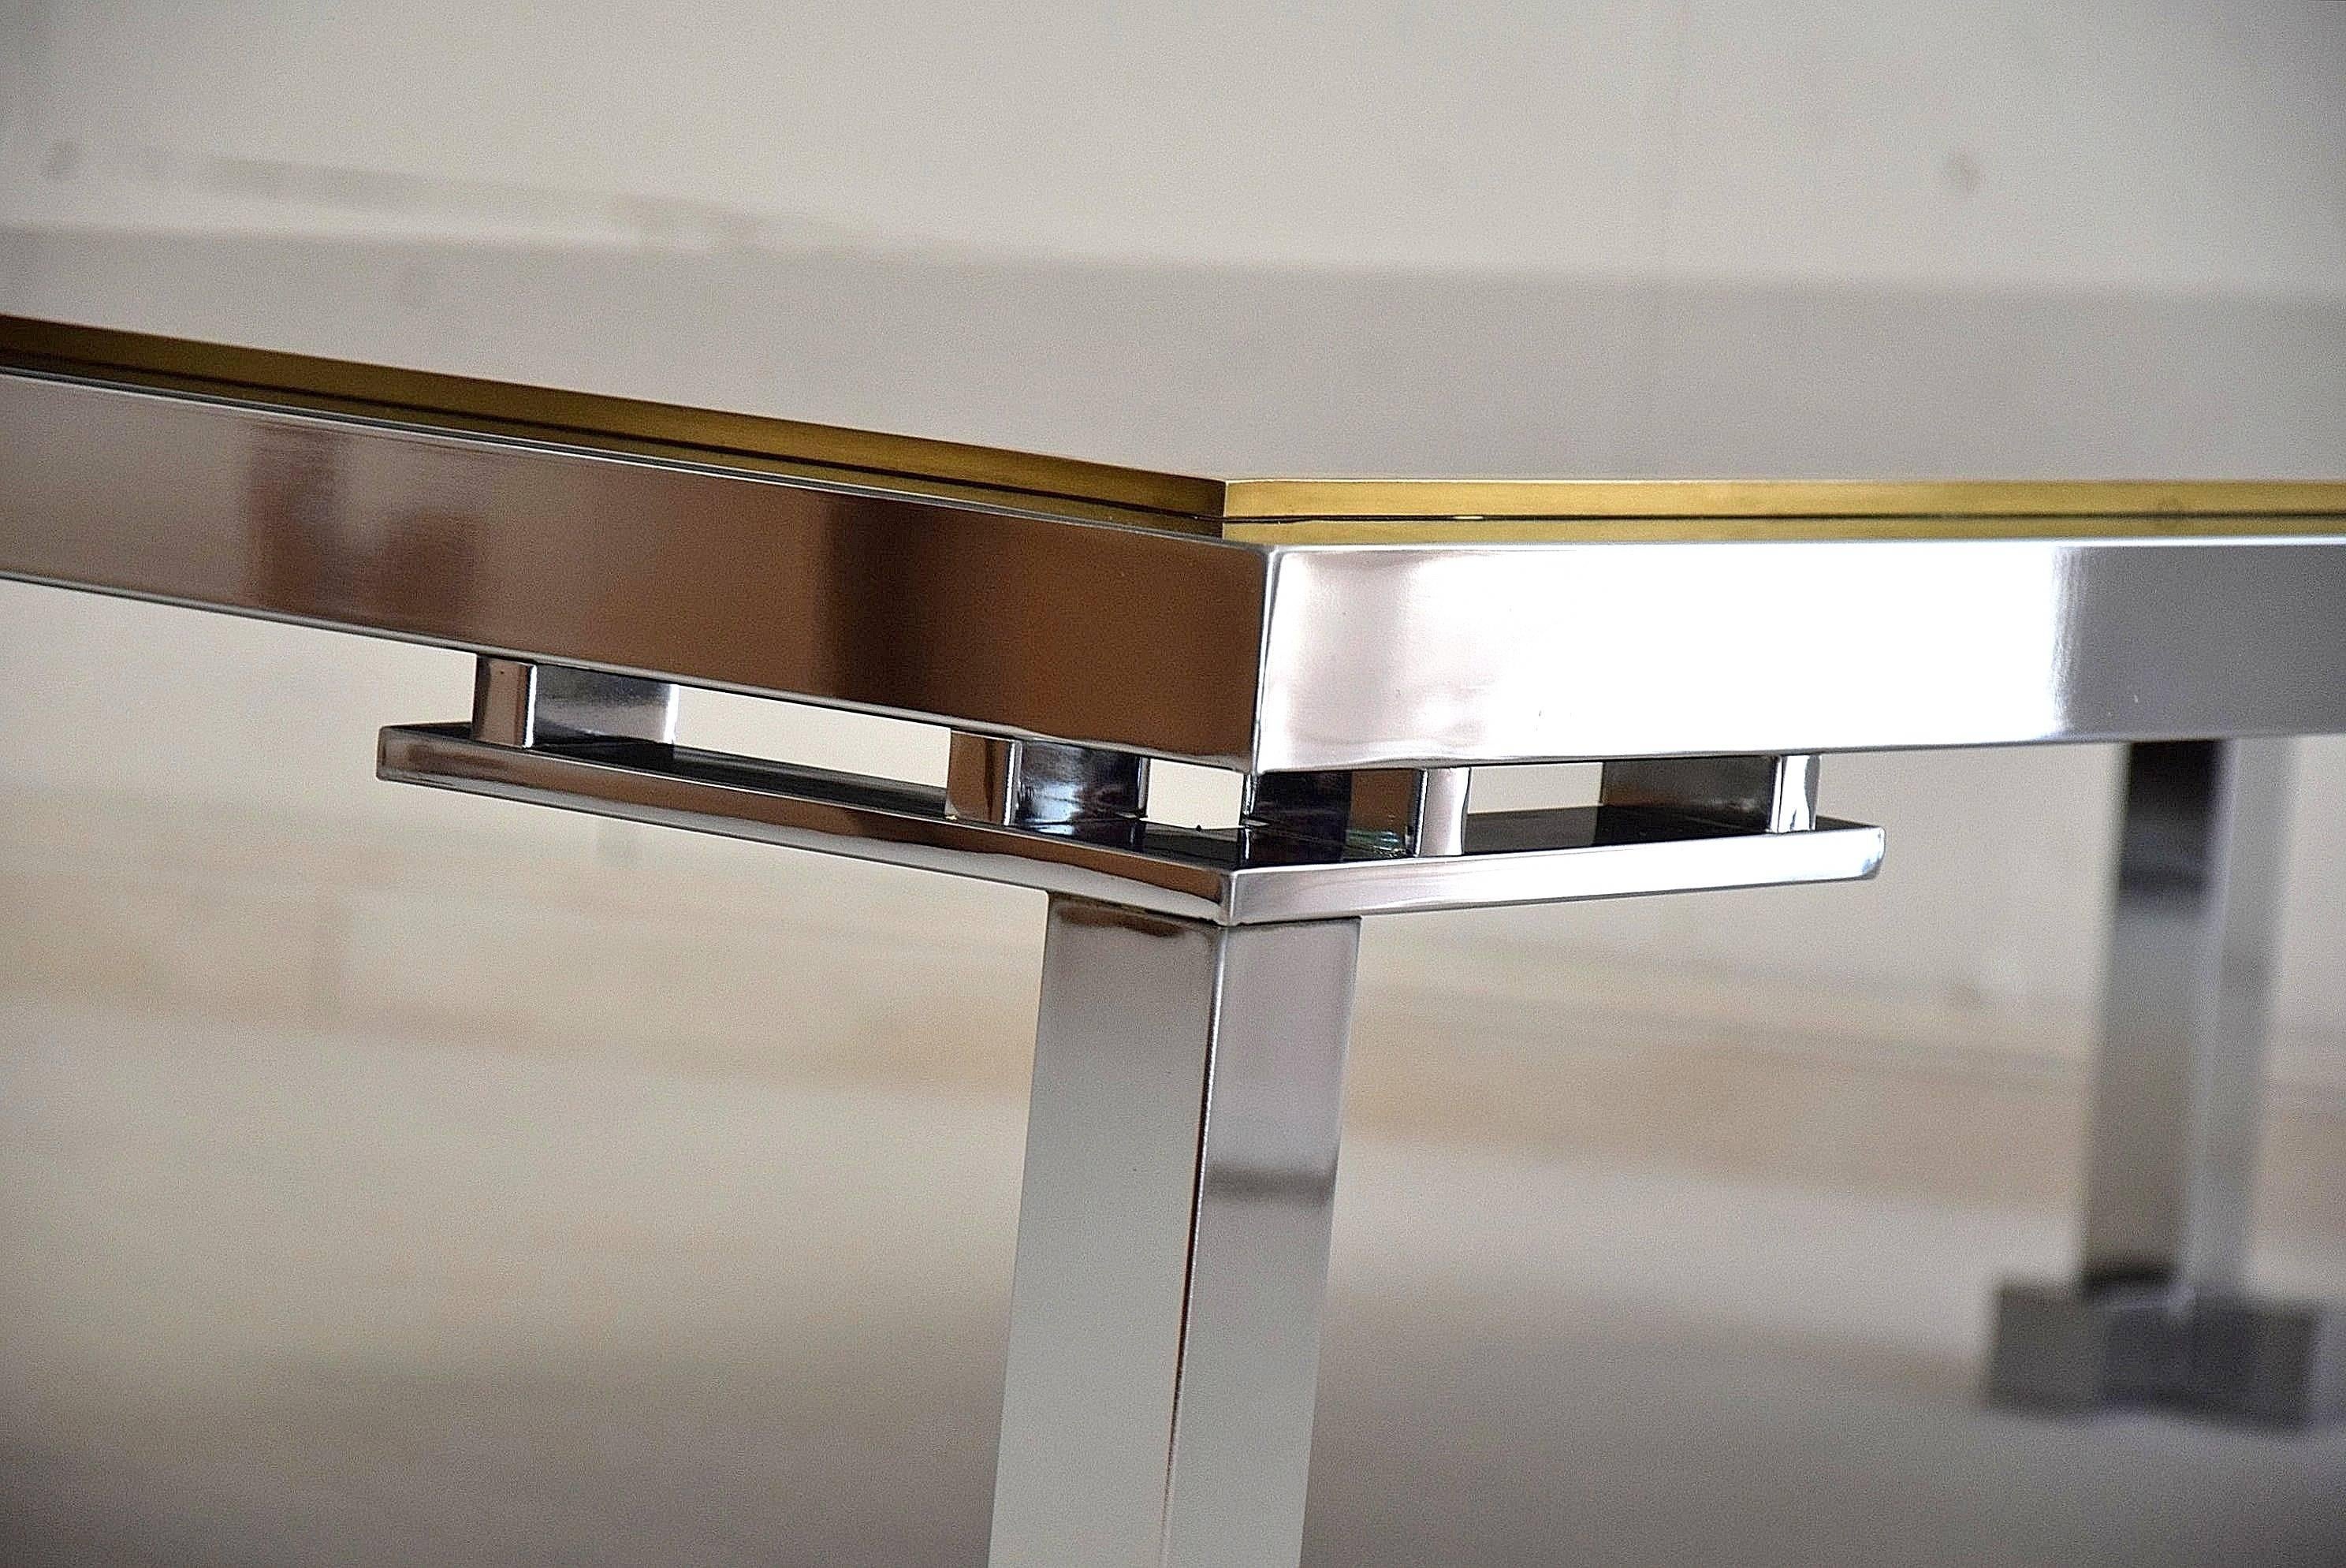 Chrome and brass hollywood regency coffee table.
Rare chrome and brass coffee table with smoked mirror top produced by Belgo Chrome, Belgium in the 1970s.
A truly stylish and cool coffee table.
Measurements : W 62 x D 132 x H 35 cm.
Table will be